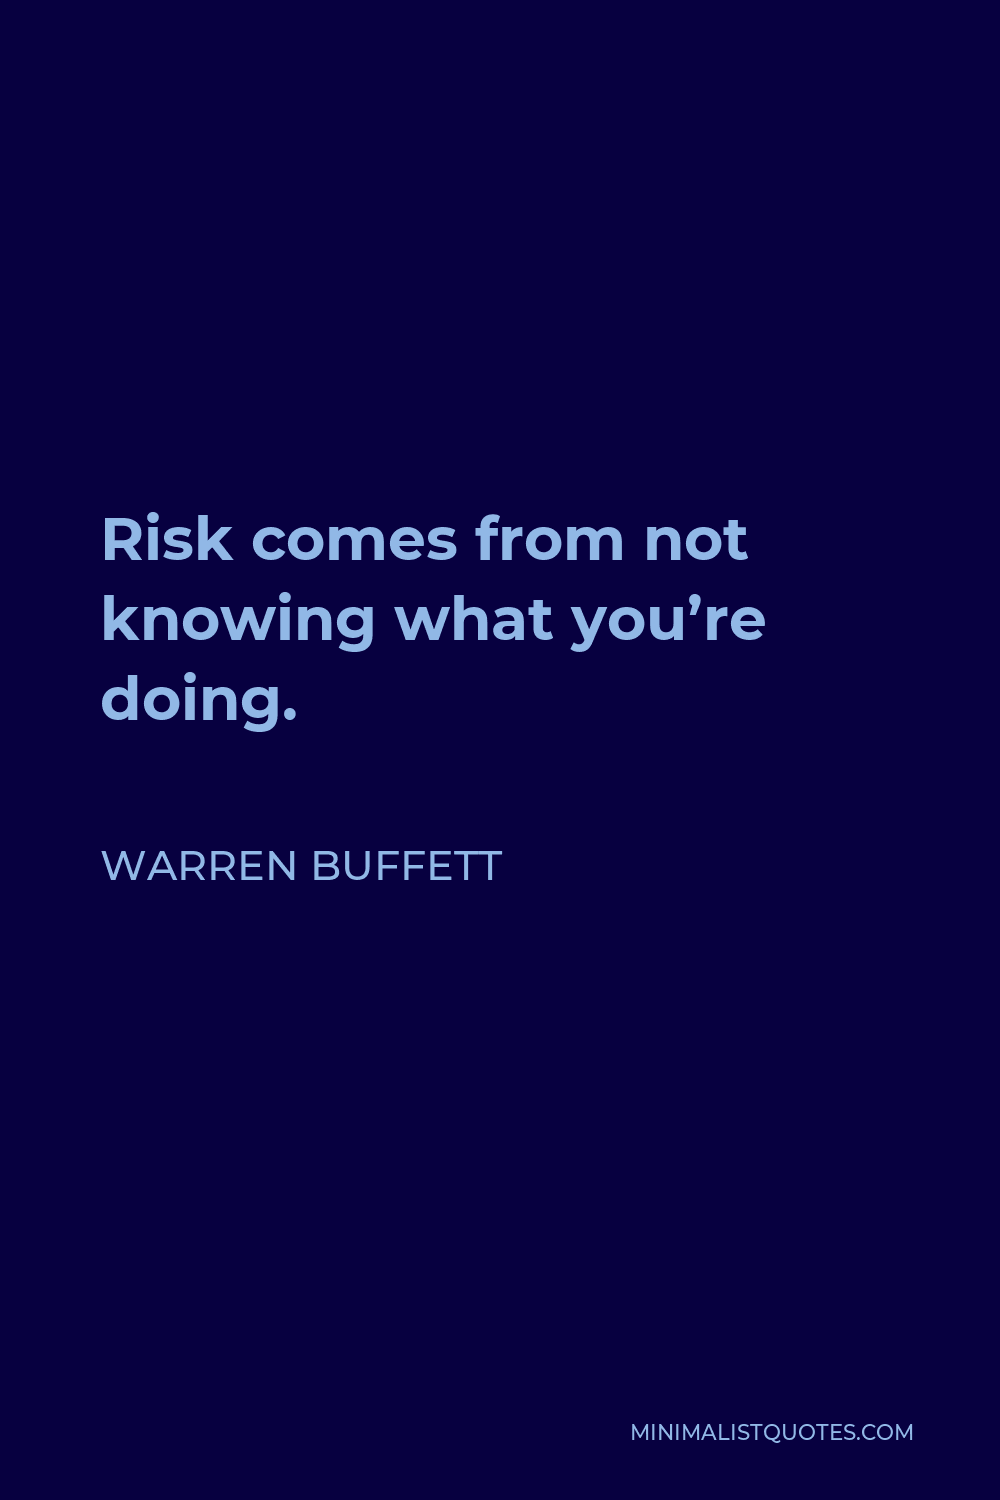 Warren Buffett Quote - Risk comes from not knowing what you’re doing.